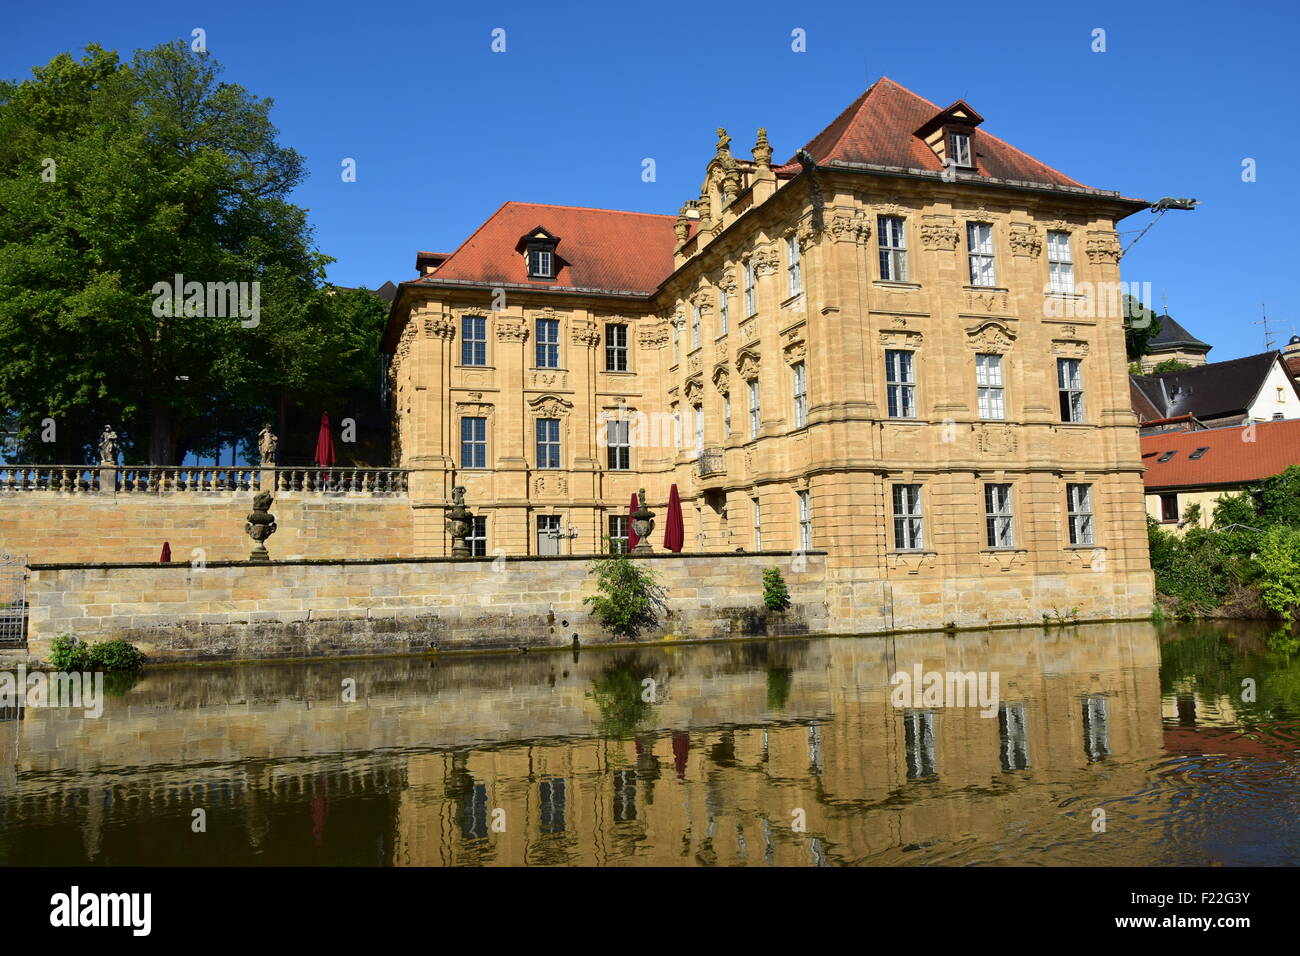 11 photography images Alamy Villa Page hi-res - stock and - germany